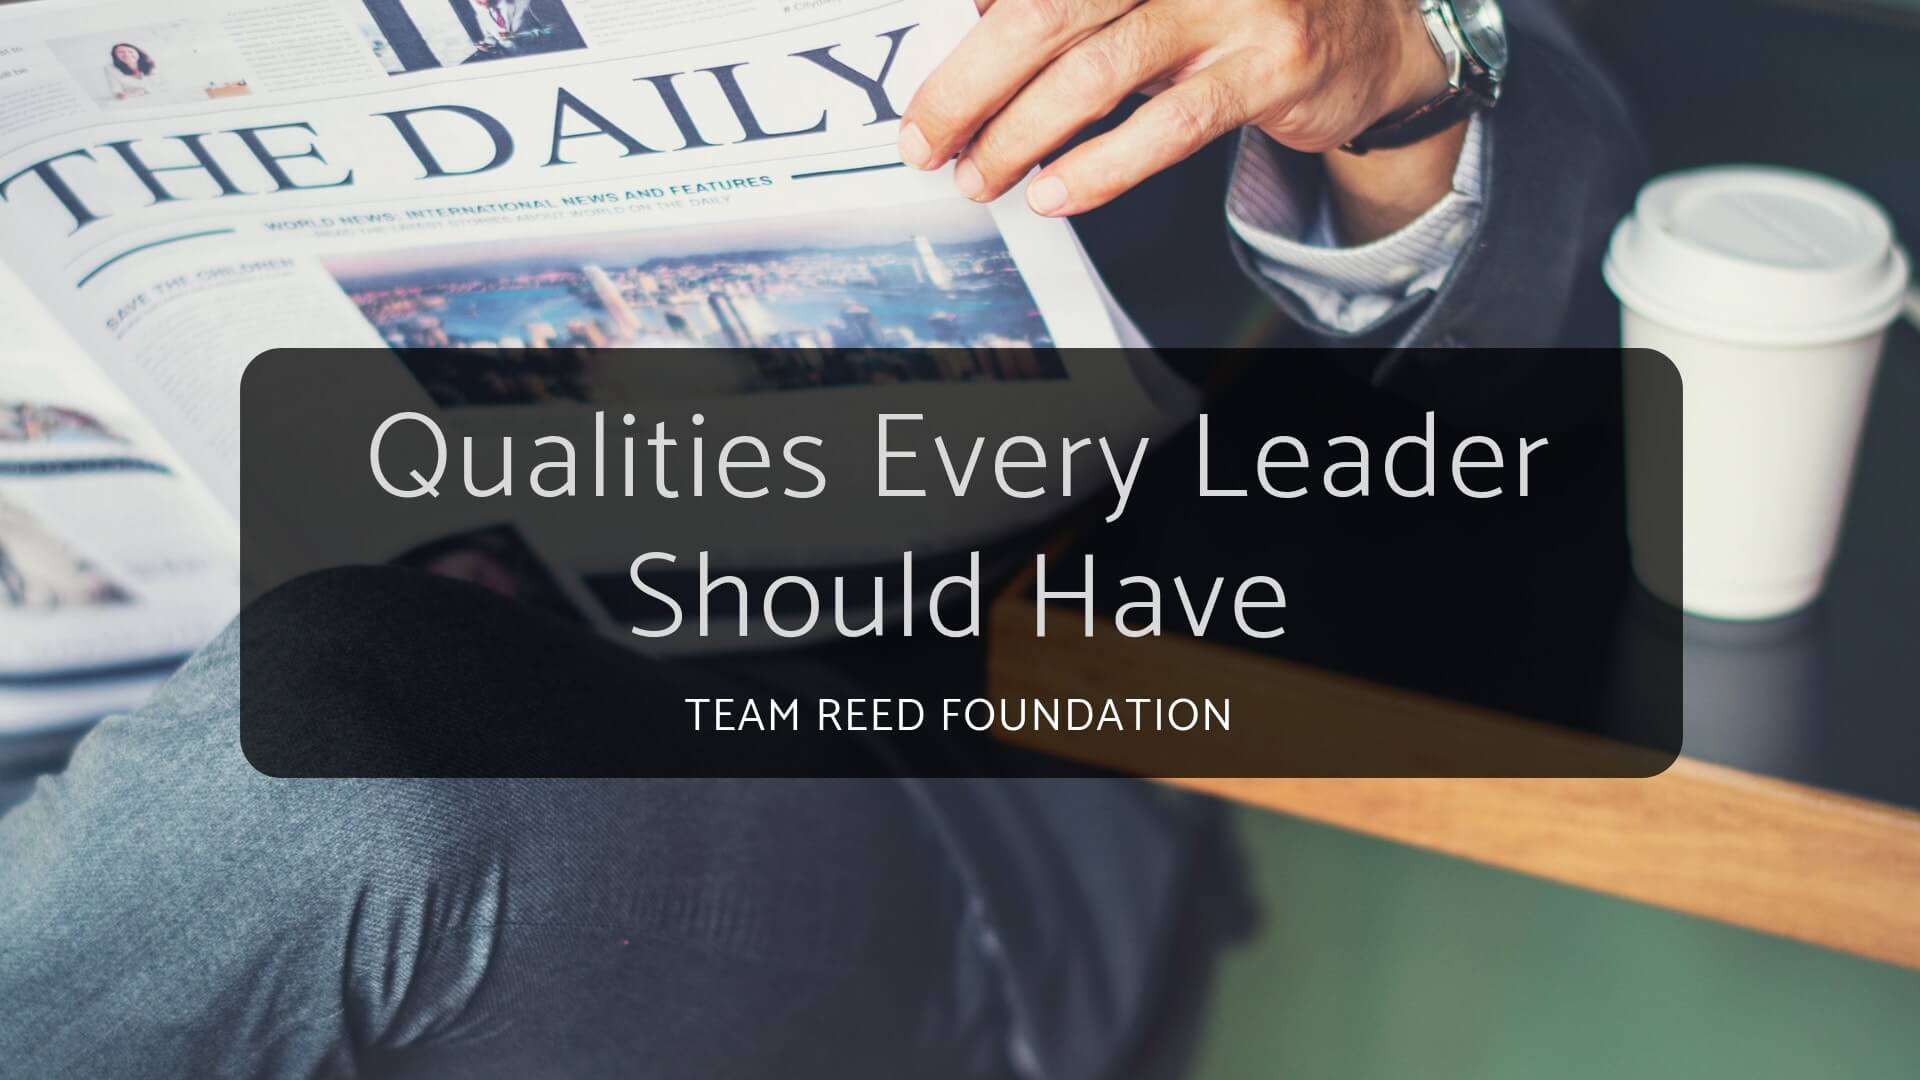 Qualities Every Leader Should Have, Team Reed Foundation